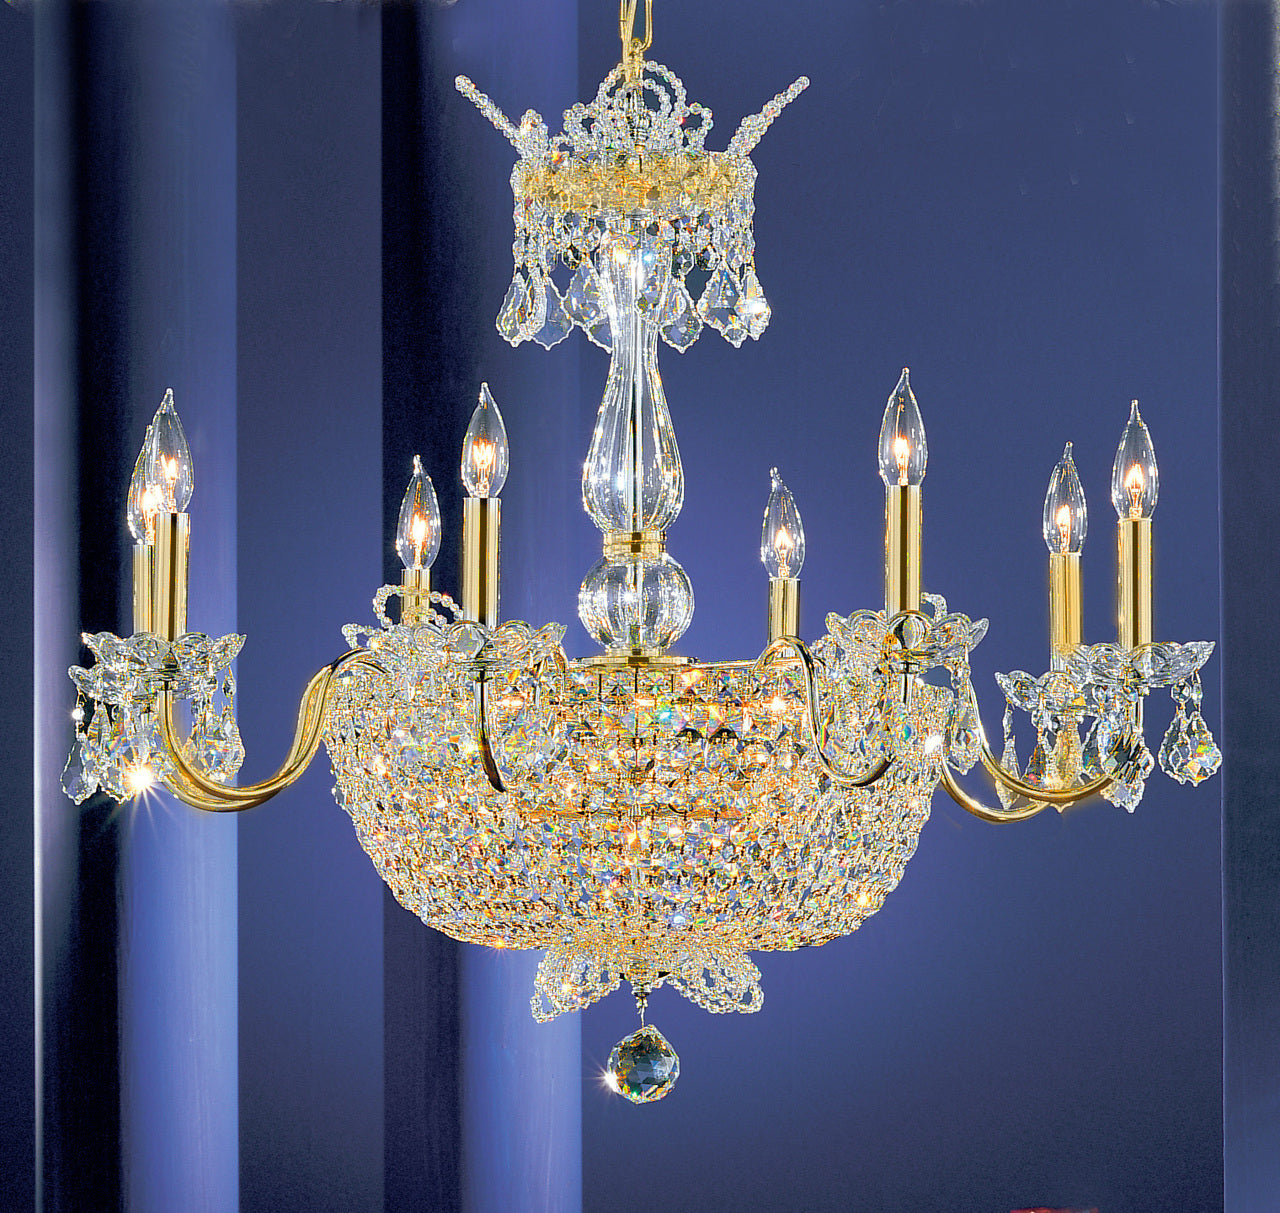 Classic Lighting 69788 GP CP Crown Jewels Crystal Chandelier in Gold